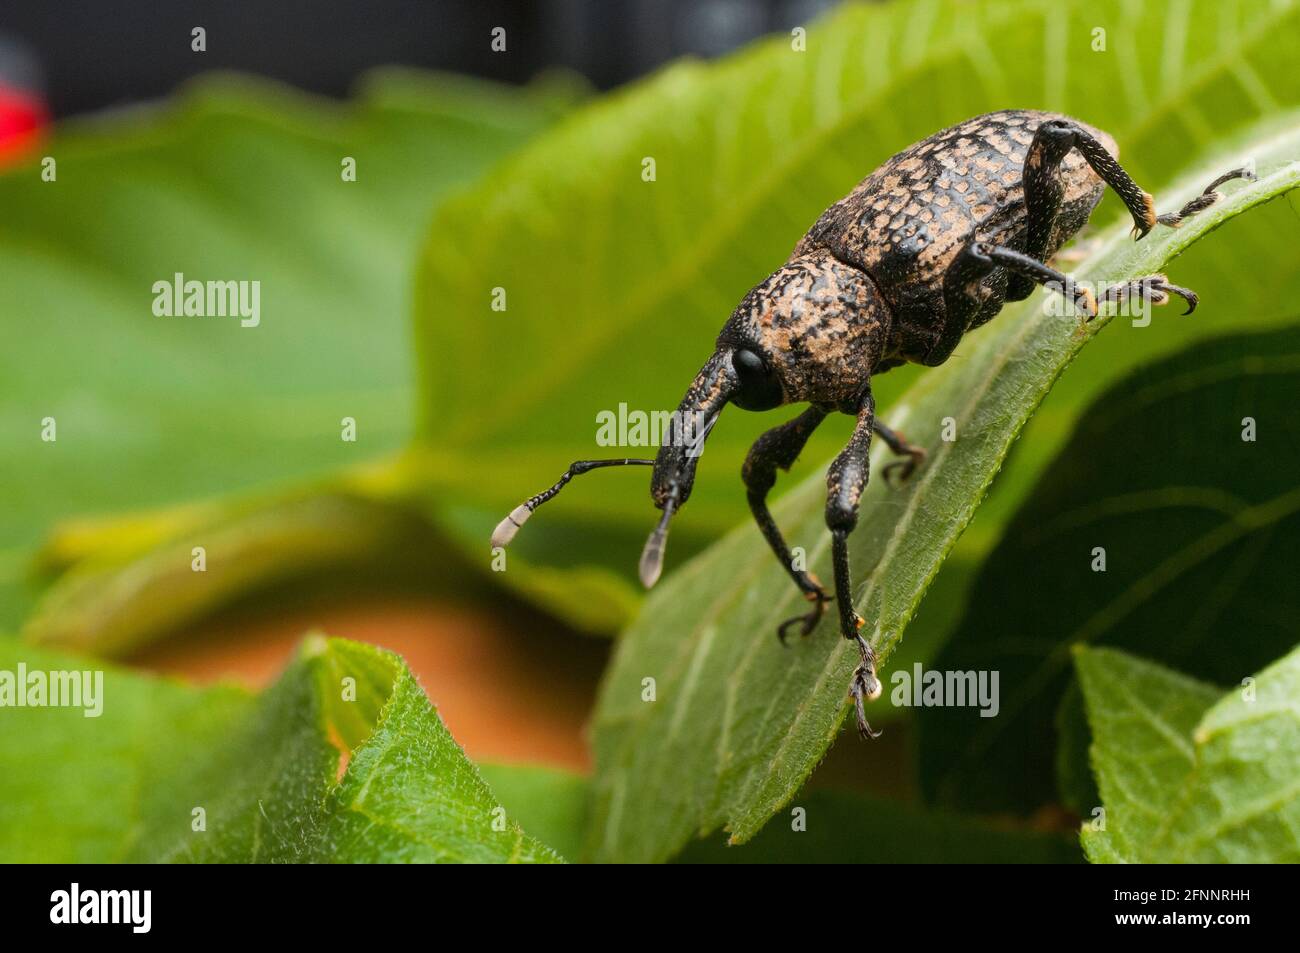 Fig tree weevil (aclees cribratus Gyllenhy). This beetle native to Southeast Asia is infesting the fig trees of central Italy. Stock Photo